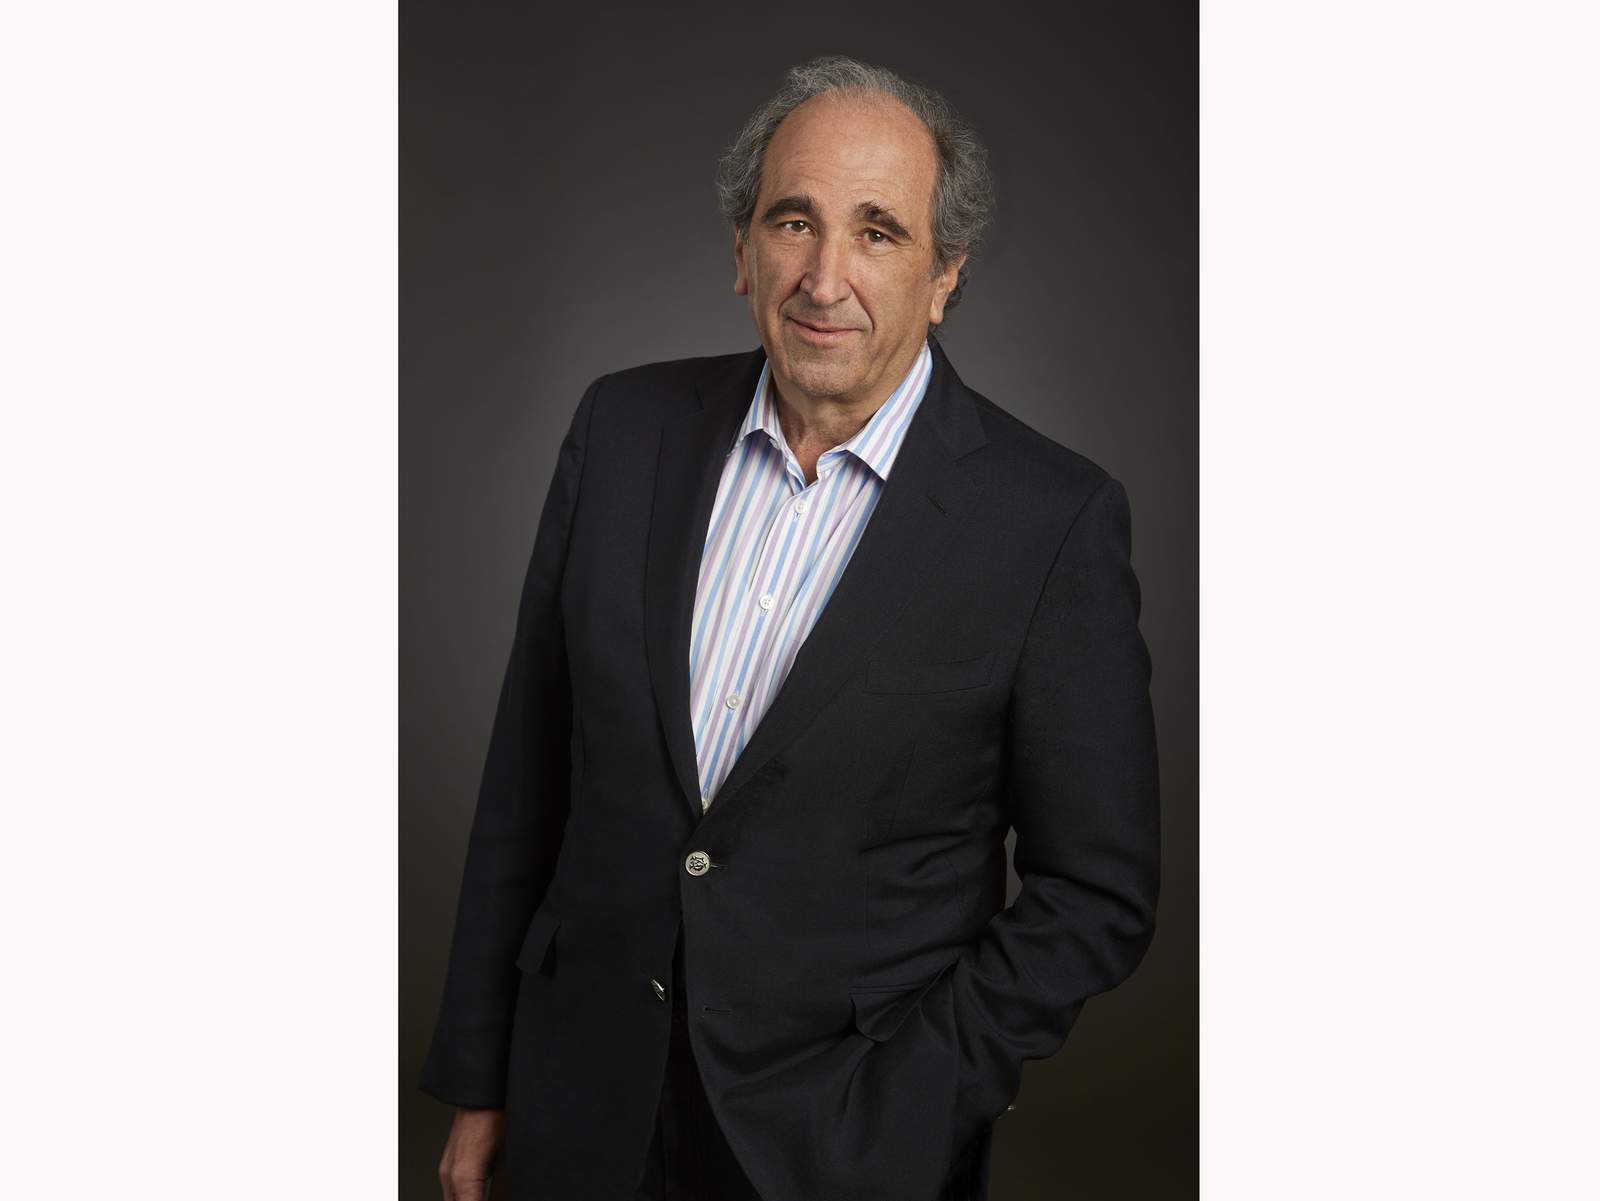 NBC News chief Andy Lack out in corporate restructuring